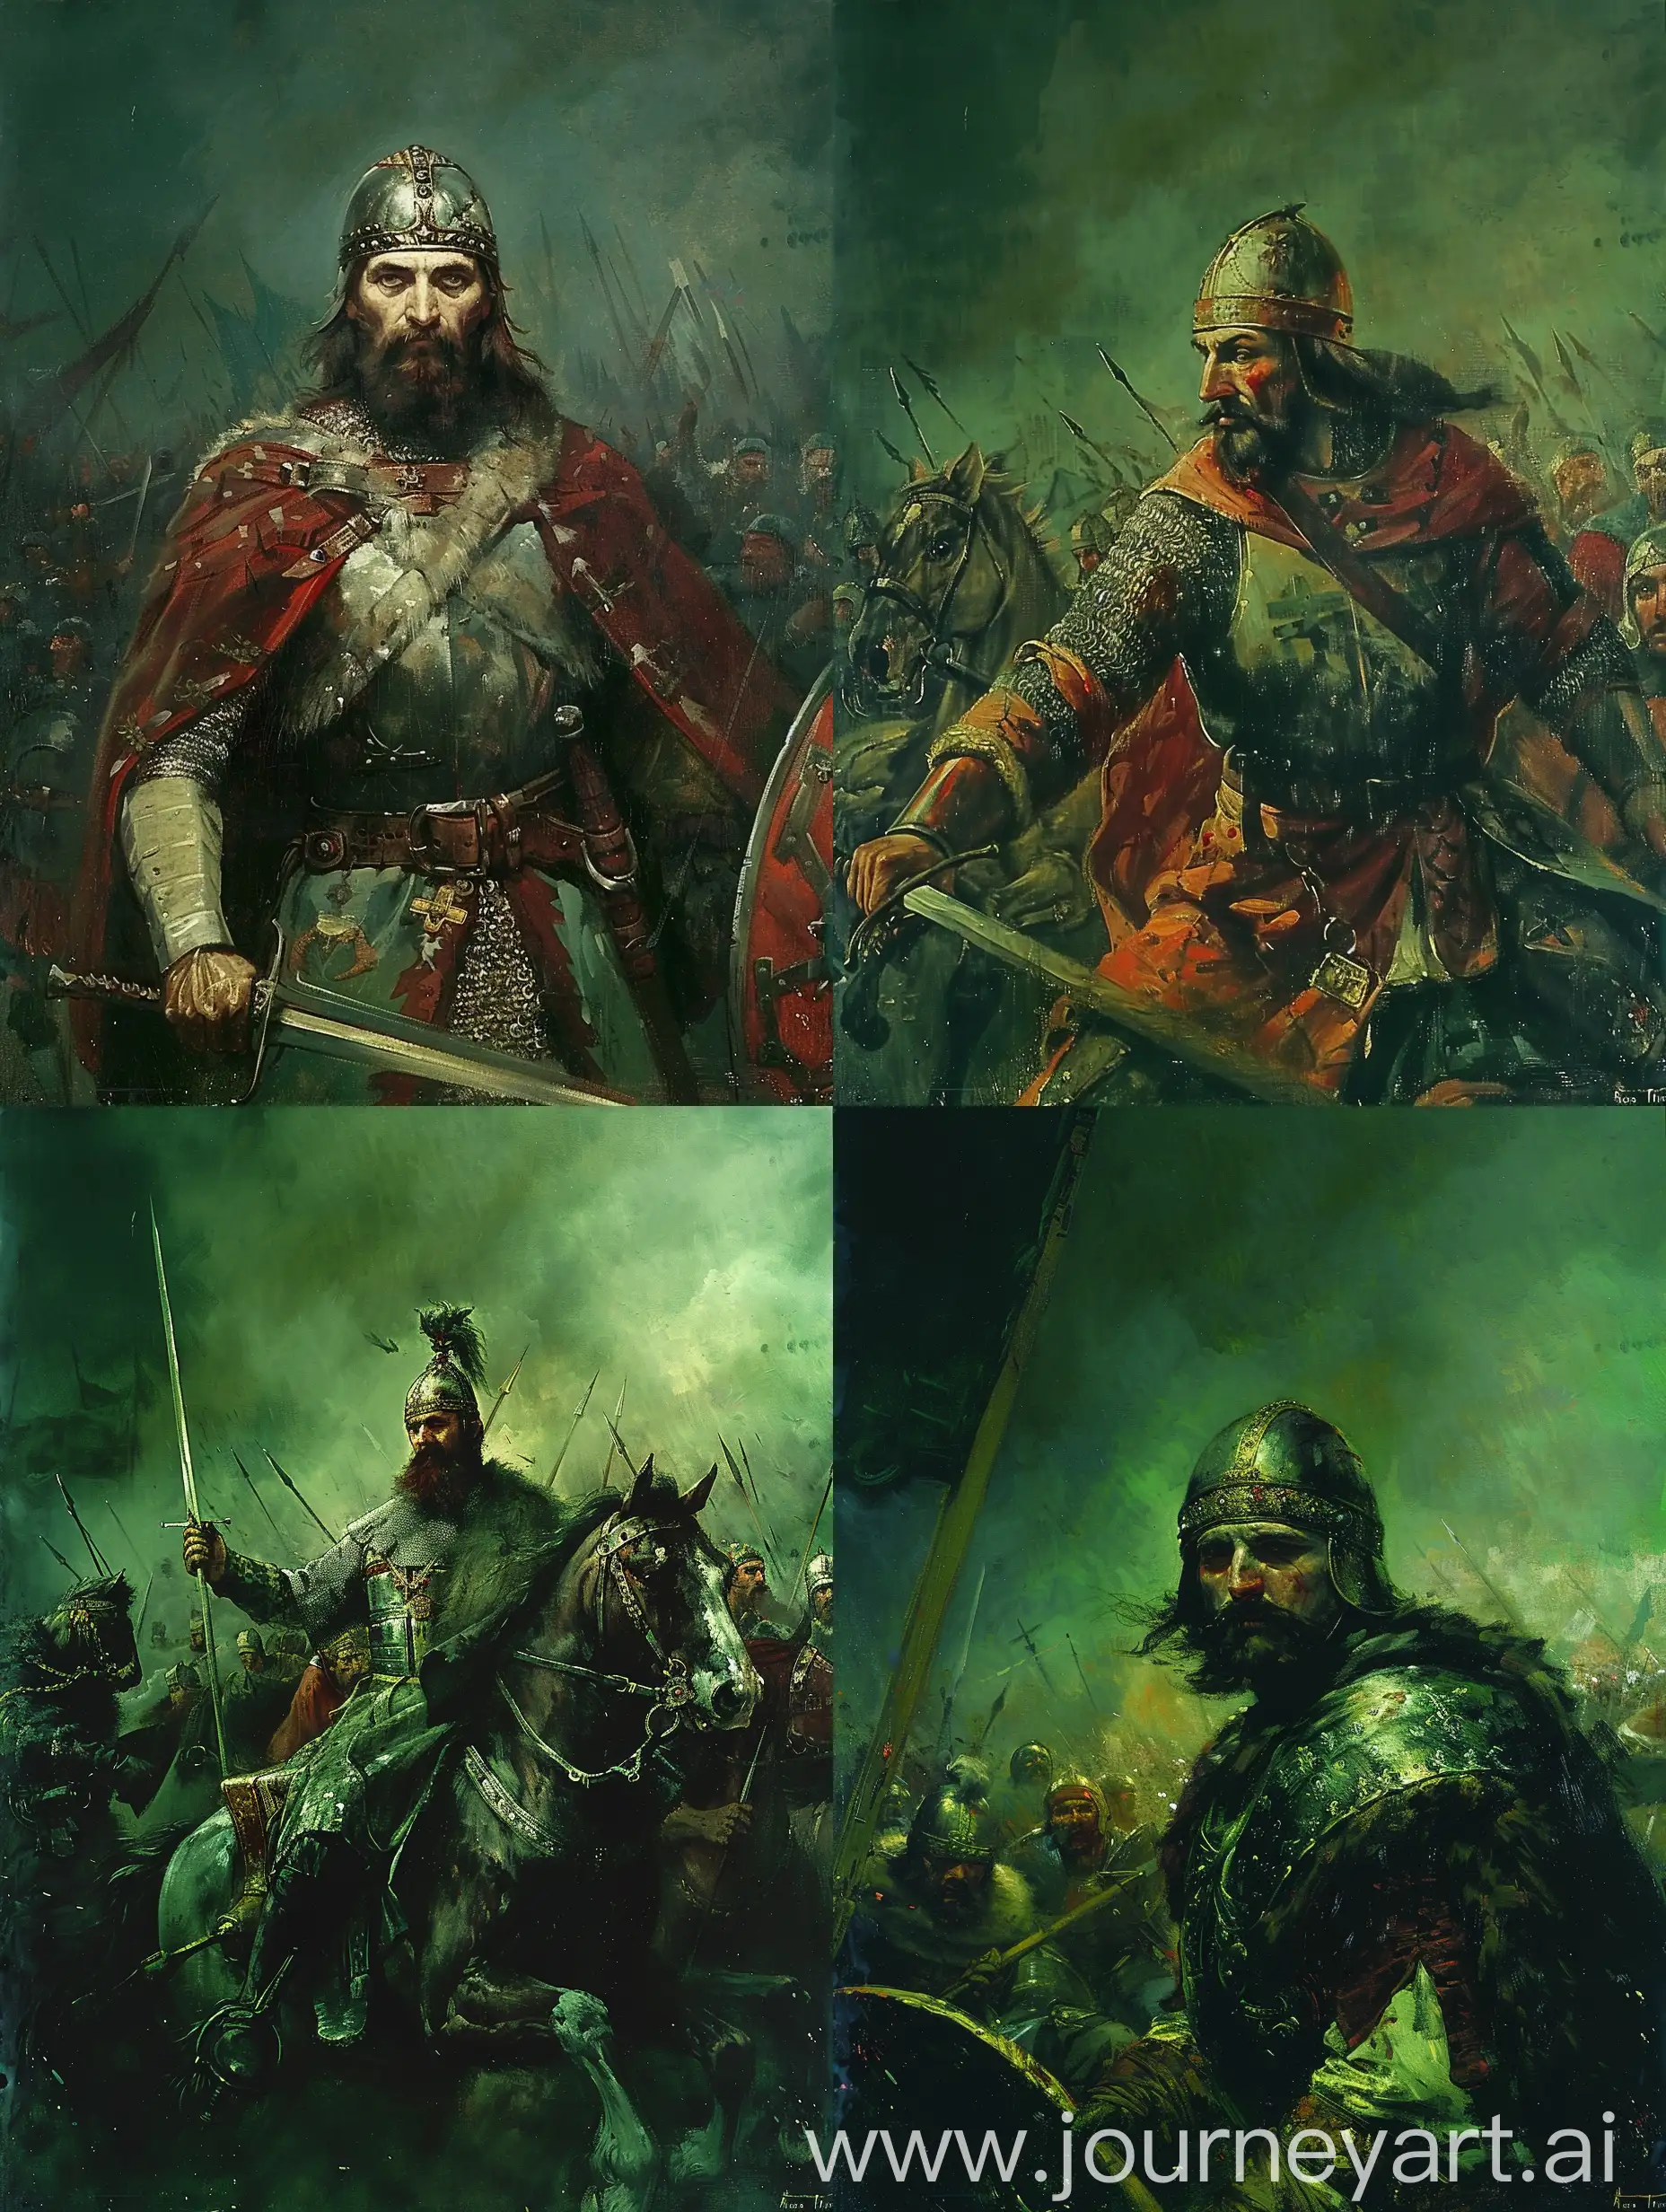 A painting of Sviatoslav I grand prince of Kiev during a battle. The background is dark green.